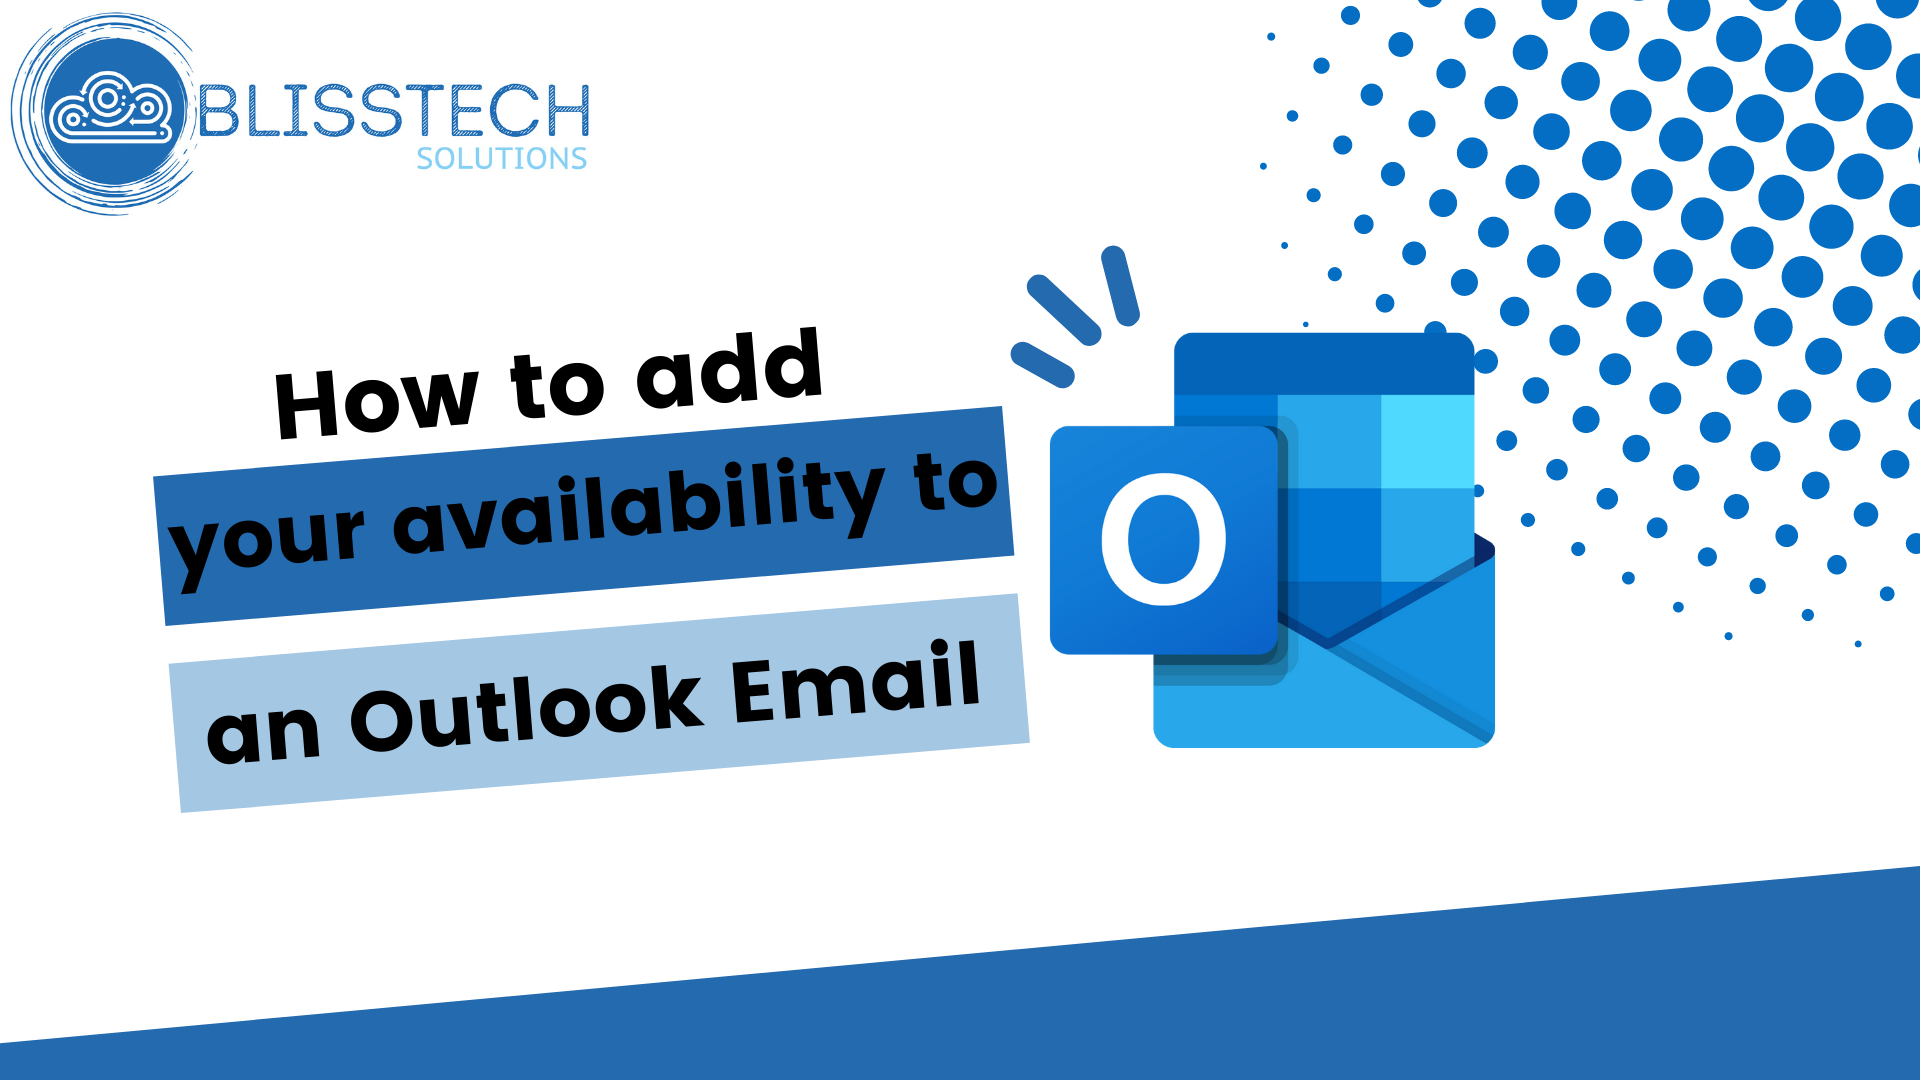 Tech Tip: How to add your availability to an Outlook Email